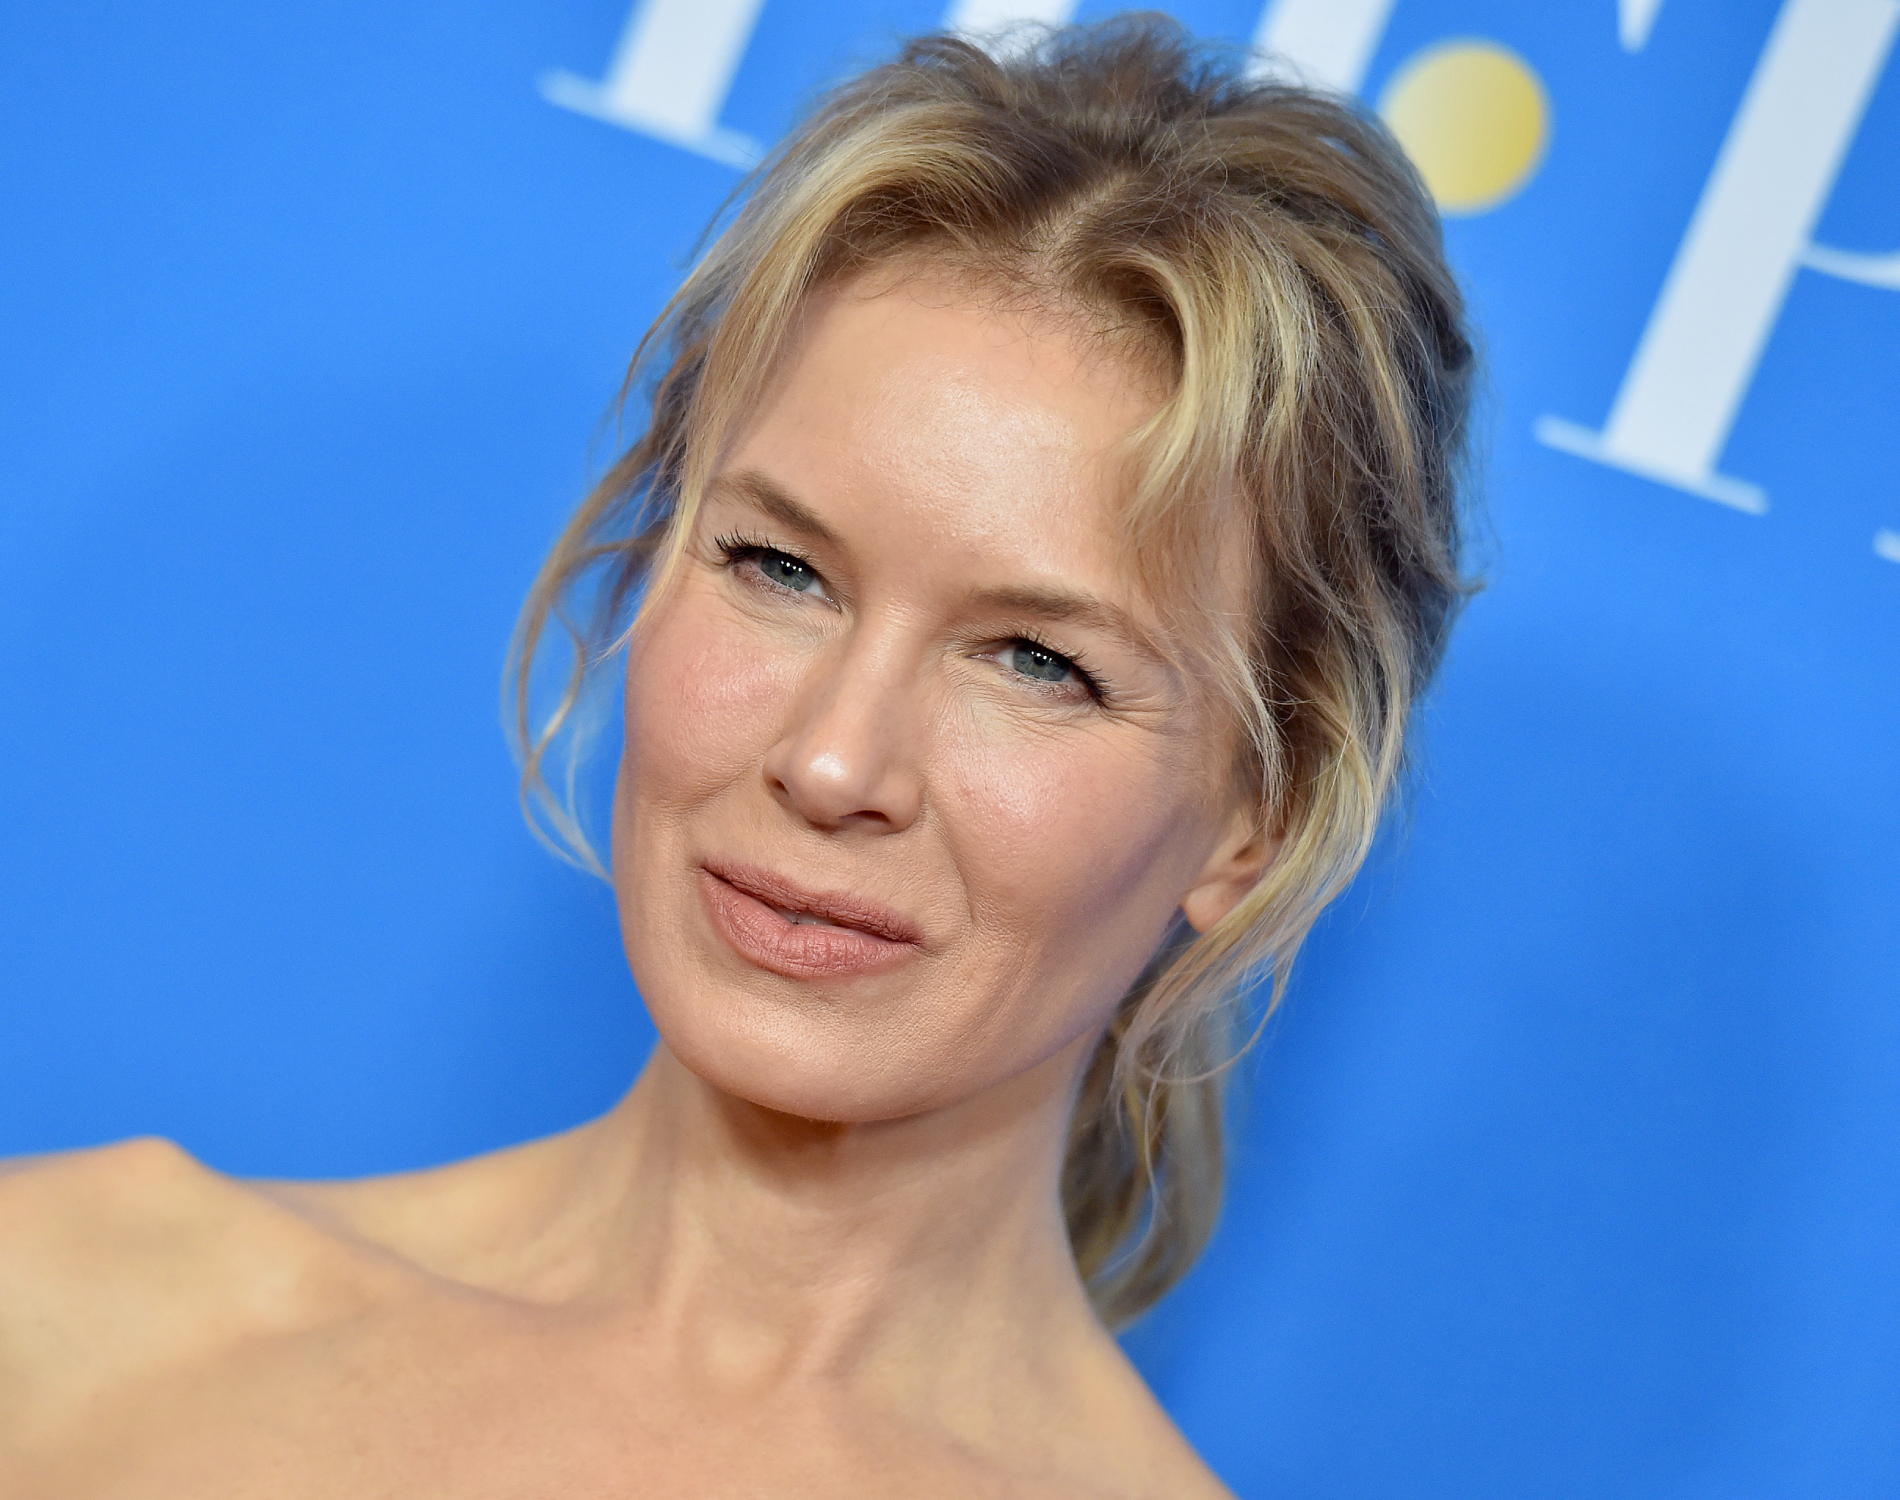 About To Die Bridget Jones Actress Renee Zellweger Speaks Candidly About Hollywood Burnout Woman Home